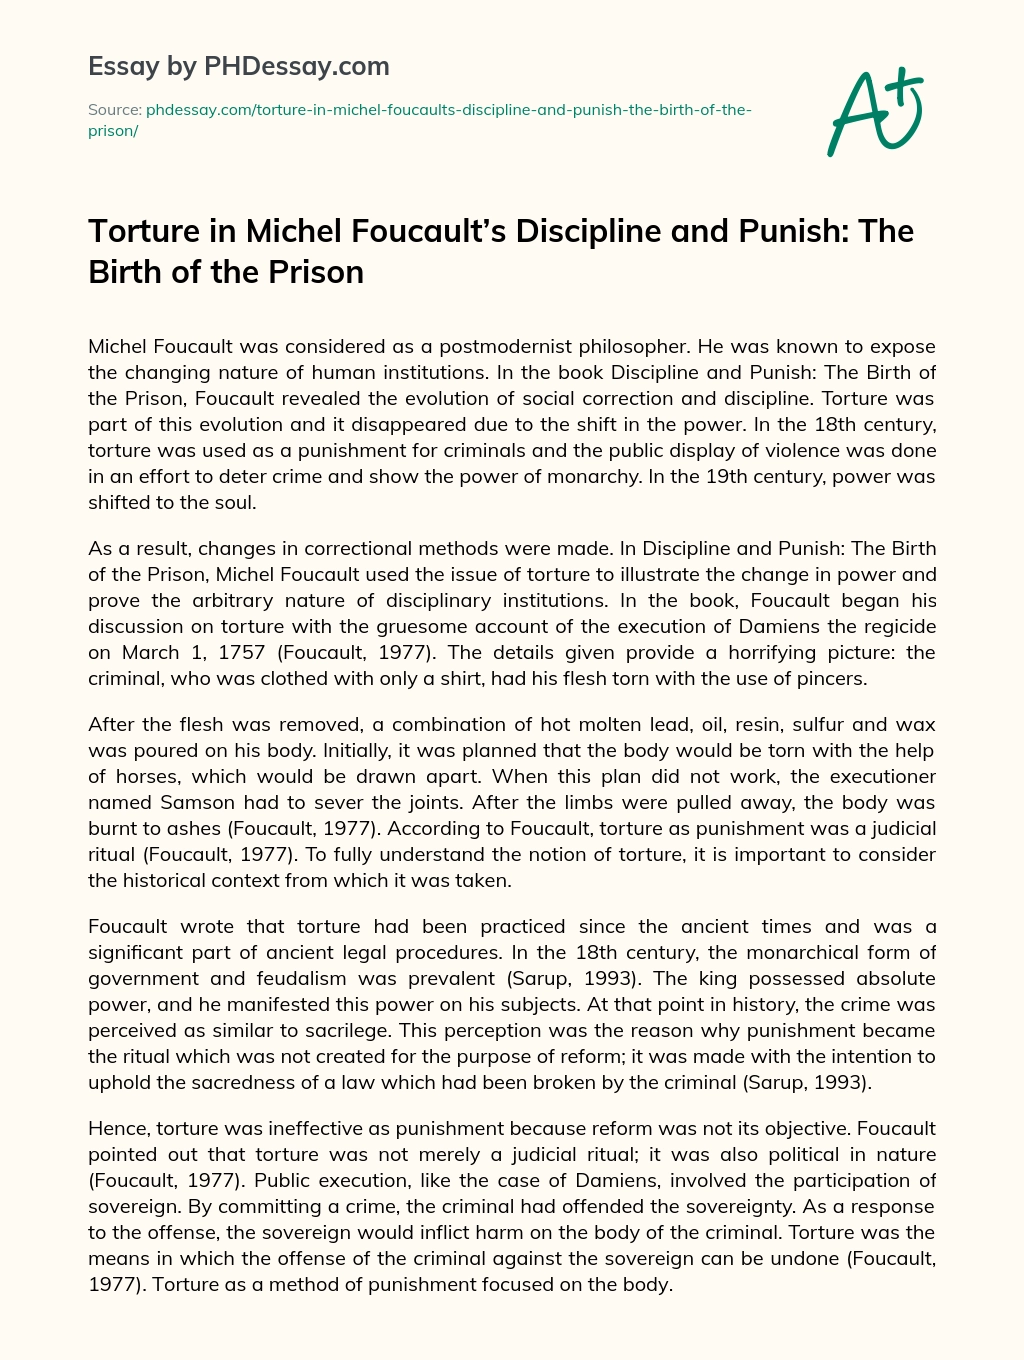 Torture in Michel Foucault’s Discipline and Punish: The Birth of the Prison essay